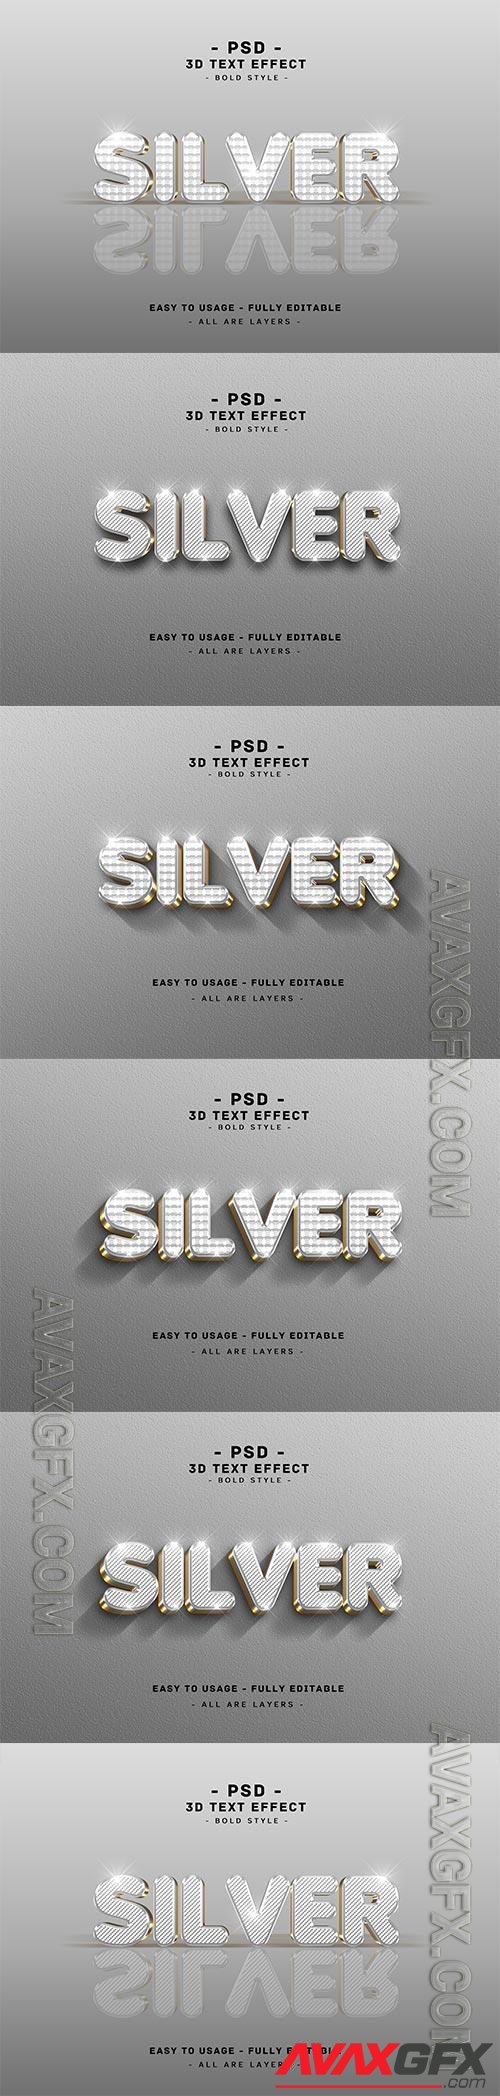 3d silver text style effect psd